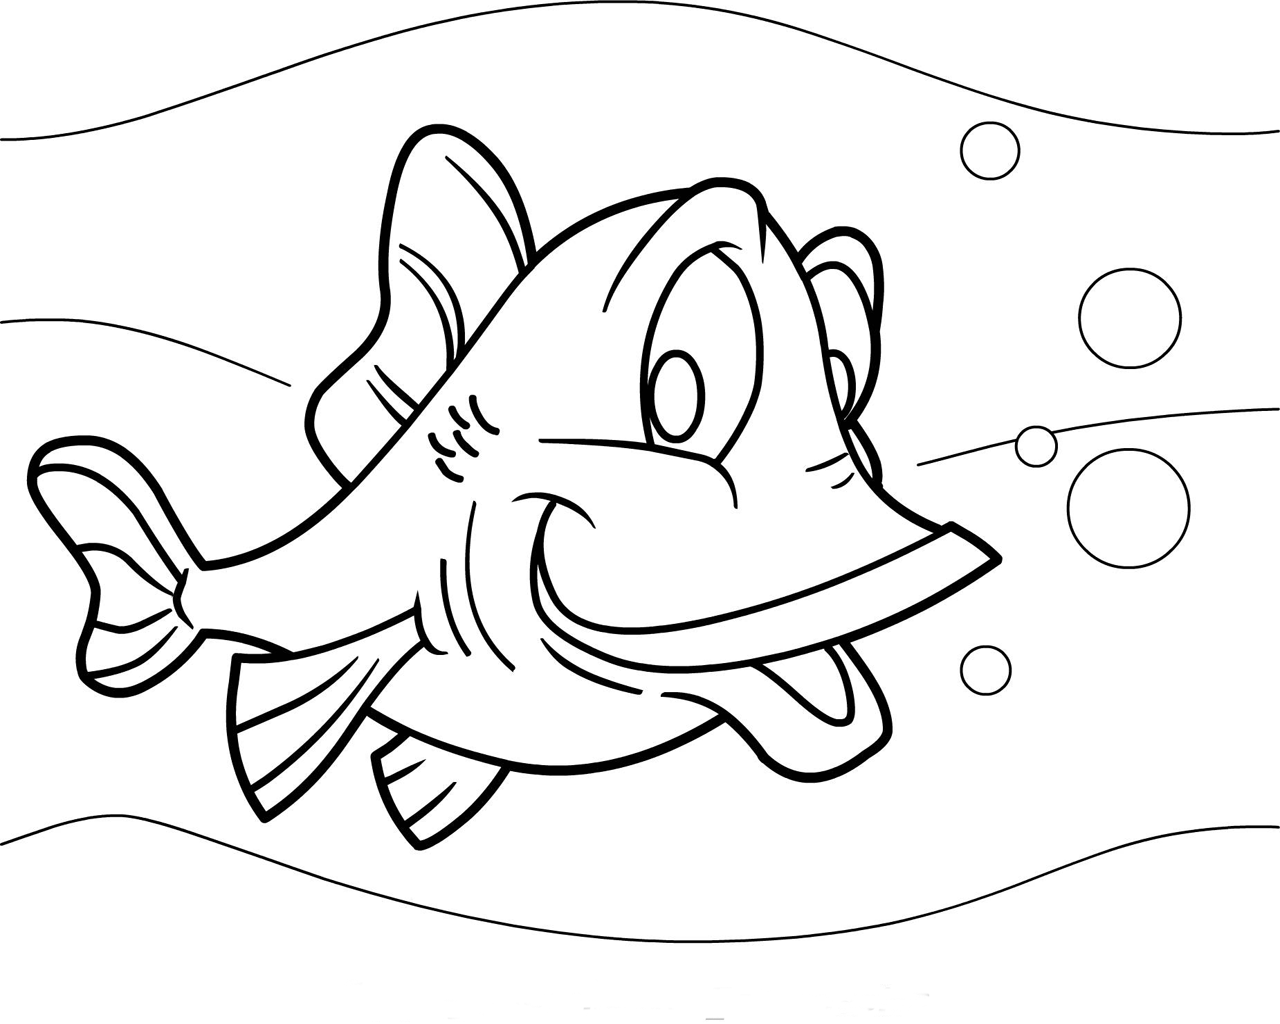 Preschool Rainbow Fish Coloring Pages : Get This Rainbow Fish Coloring